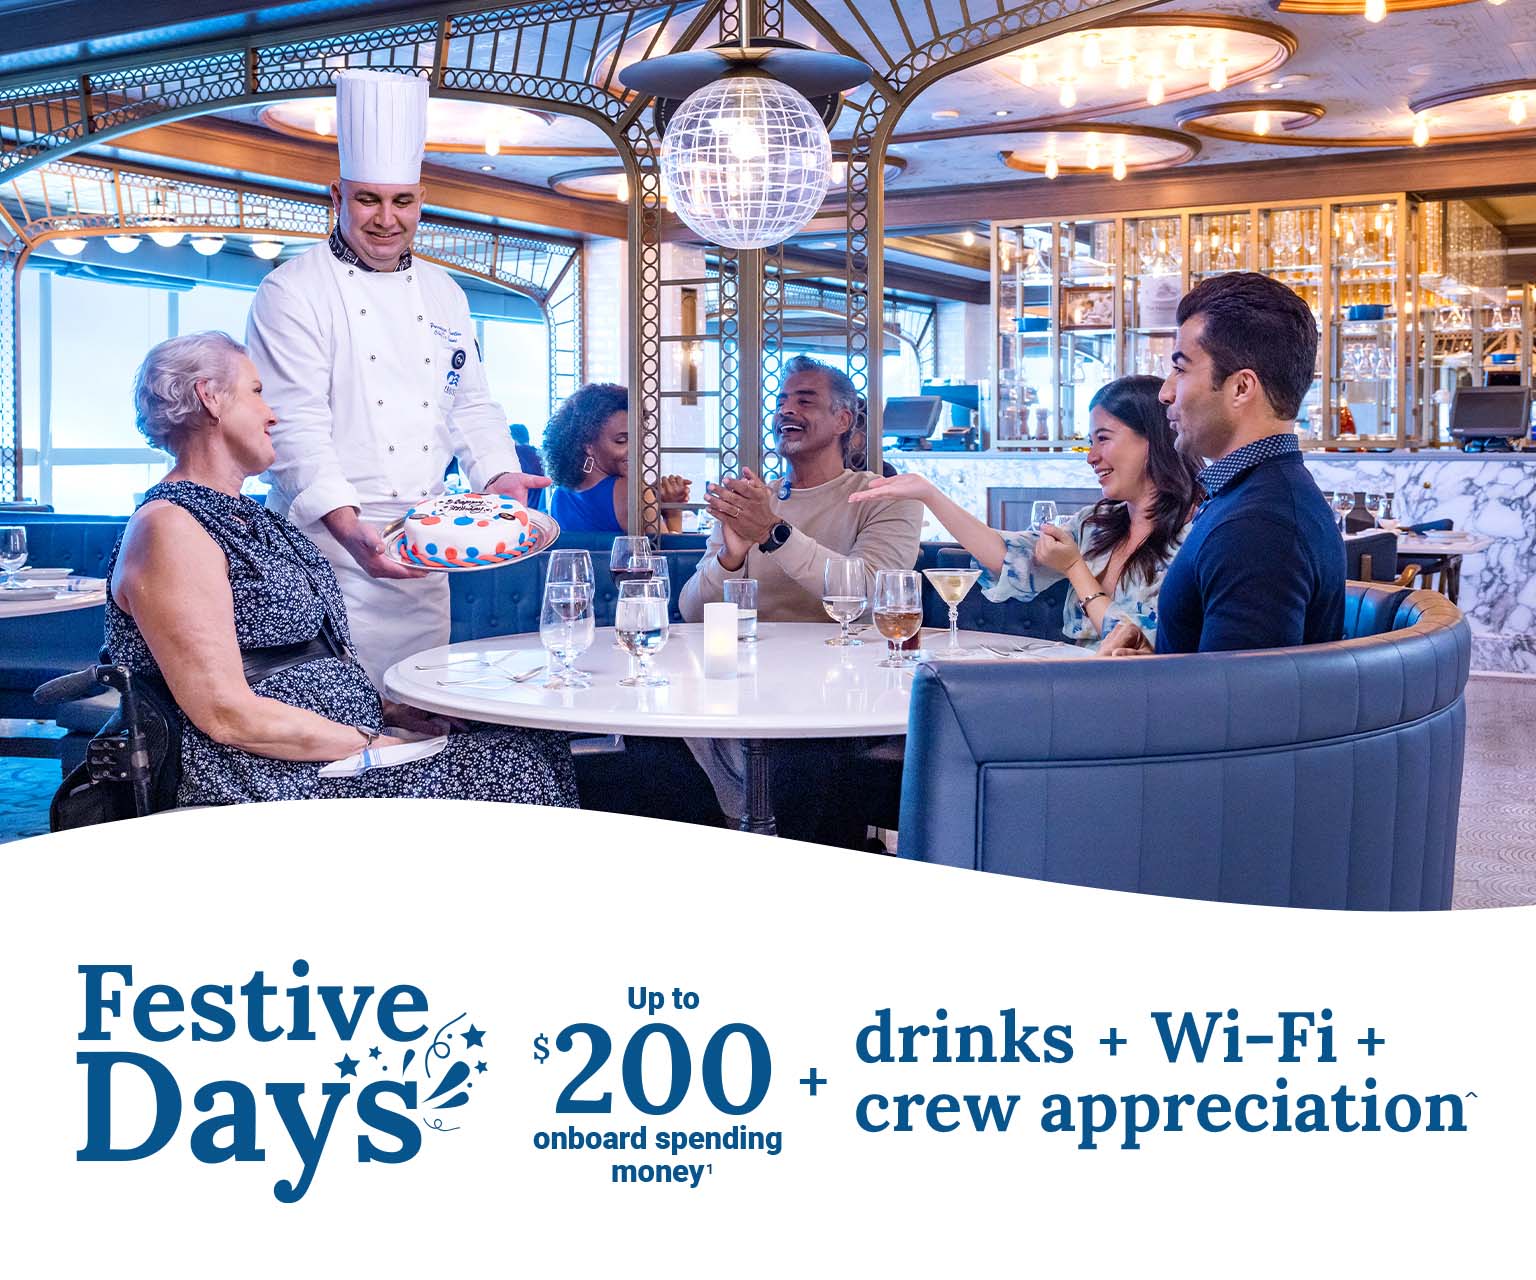 Image of chef holding Birthday cake for birthday girl and her family. Festive Days get up to $200 onboard spending money plus drinks, Wi-Fi and crew appreciation included^.